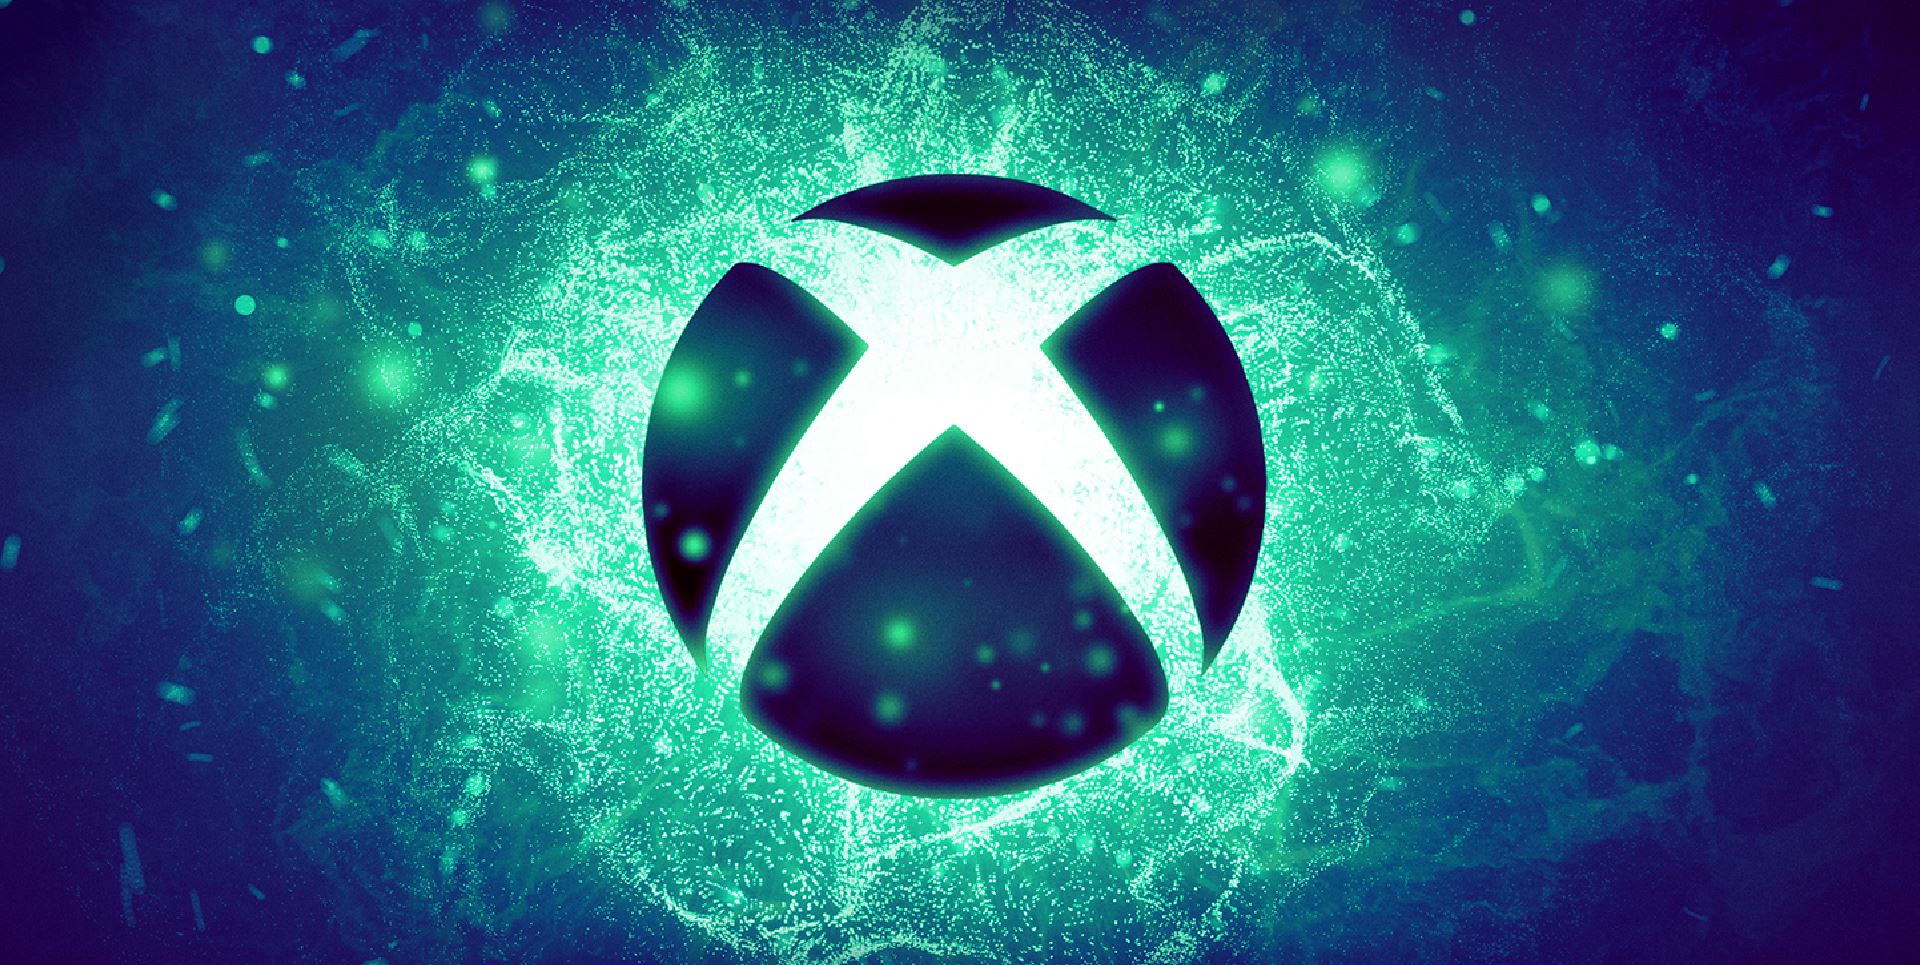 Xbox Games, Reviews and Guidelines